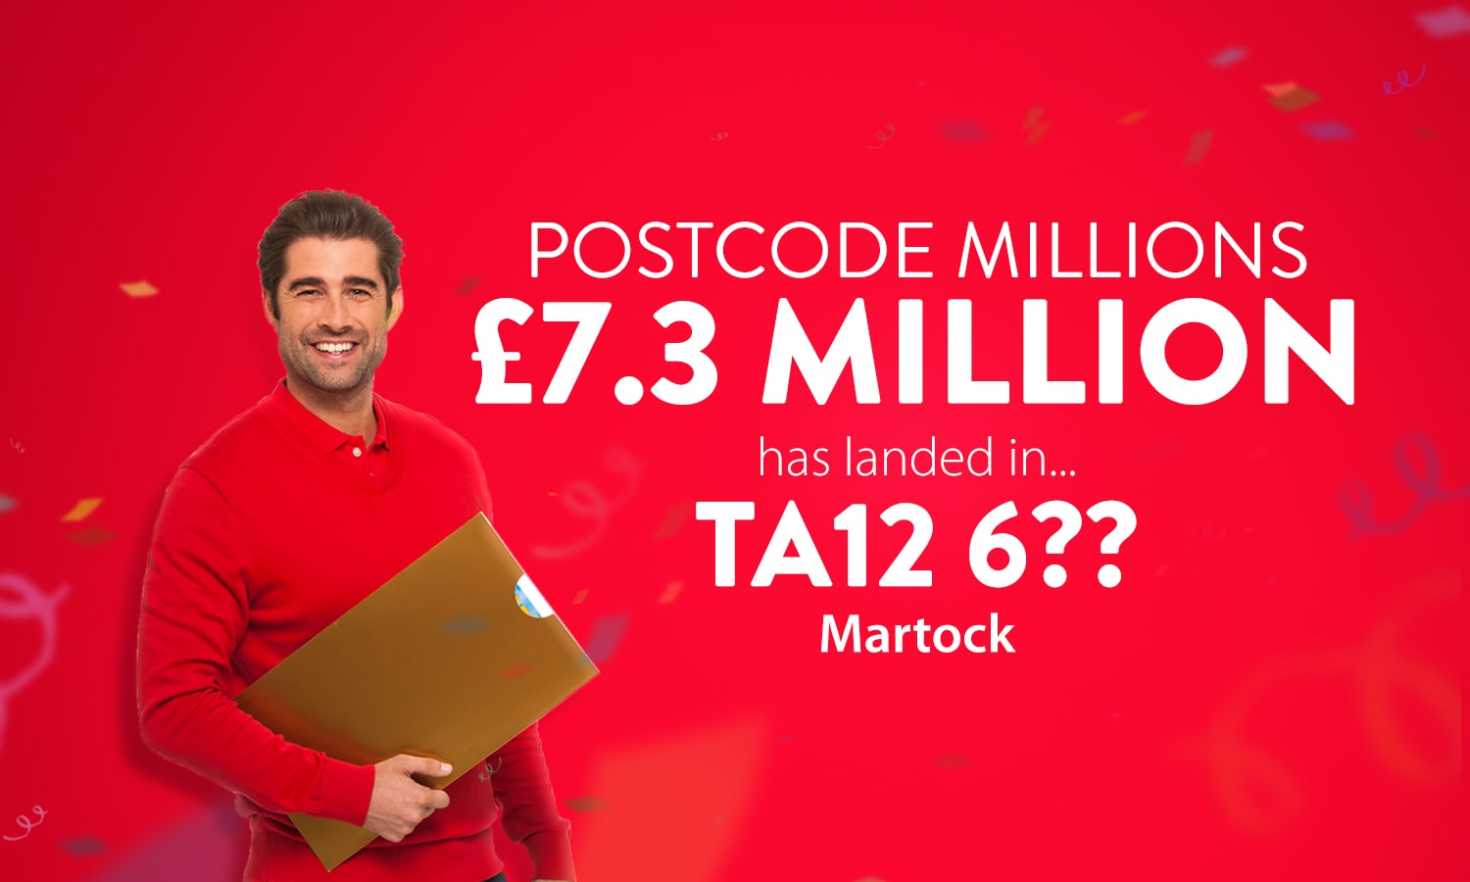 £7.3 Million in prizes is heading to Martock for this month's Postcode Millions